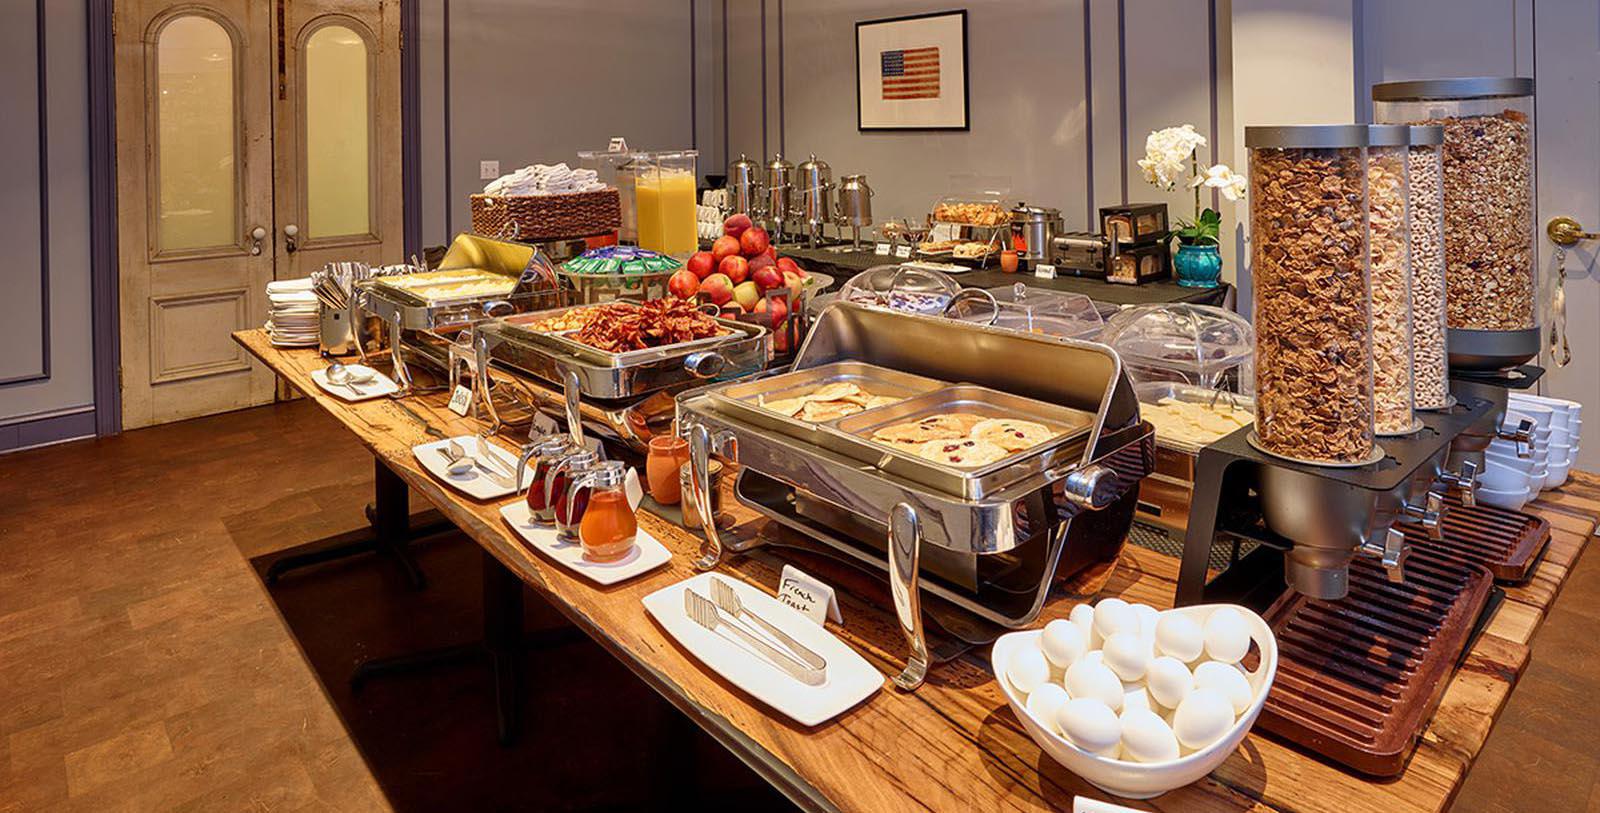 Image of Continental Breakfast The Kendall Hotel, 1894, Member of Historic Hotels of America, in Cambridge, Massachusetts, Hot Deals